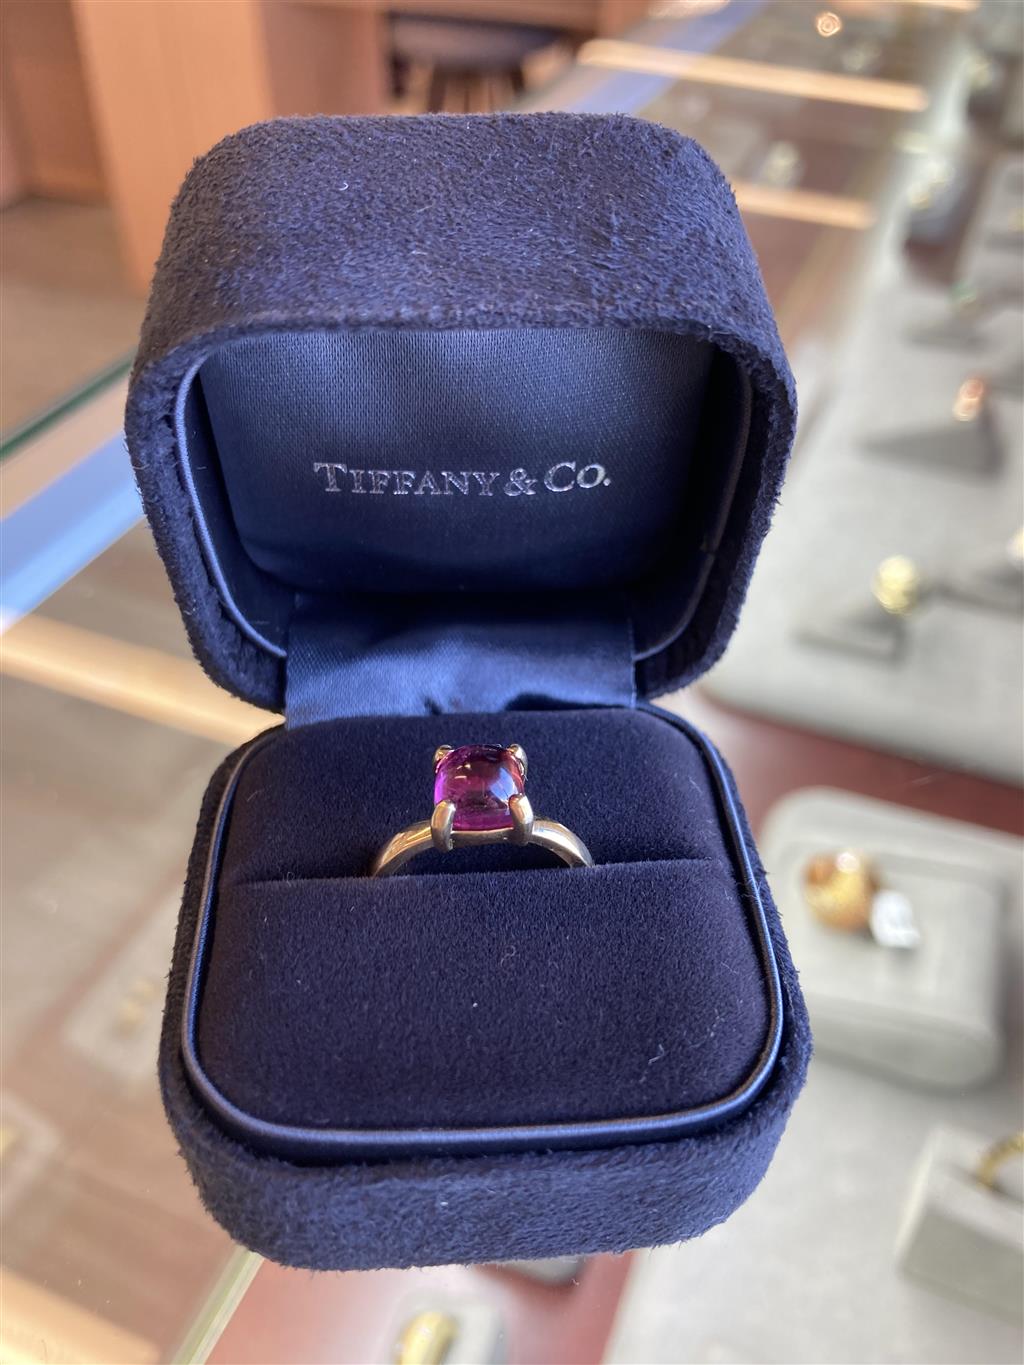 Tiffany & Co. 18K Yellow Gold Rubellite Cabochon Pink Tourmaline Sugar Stack Ring by Paloma Picasso